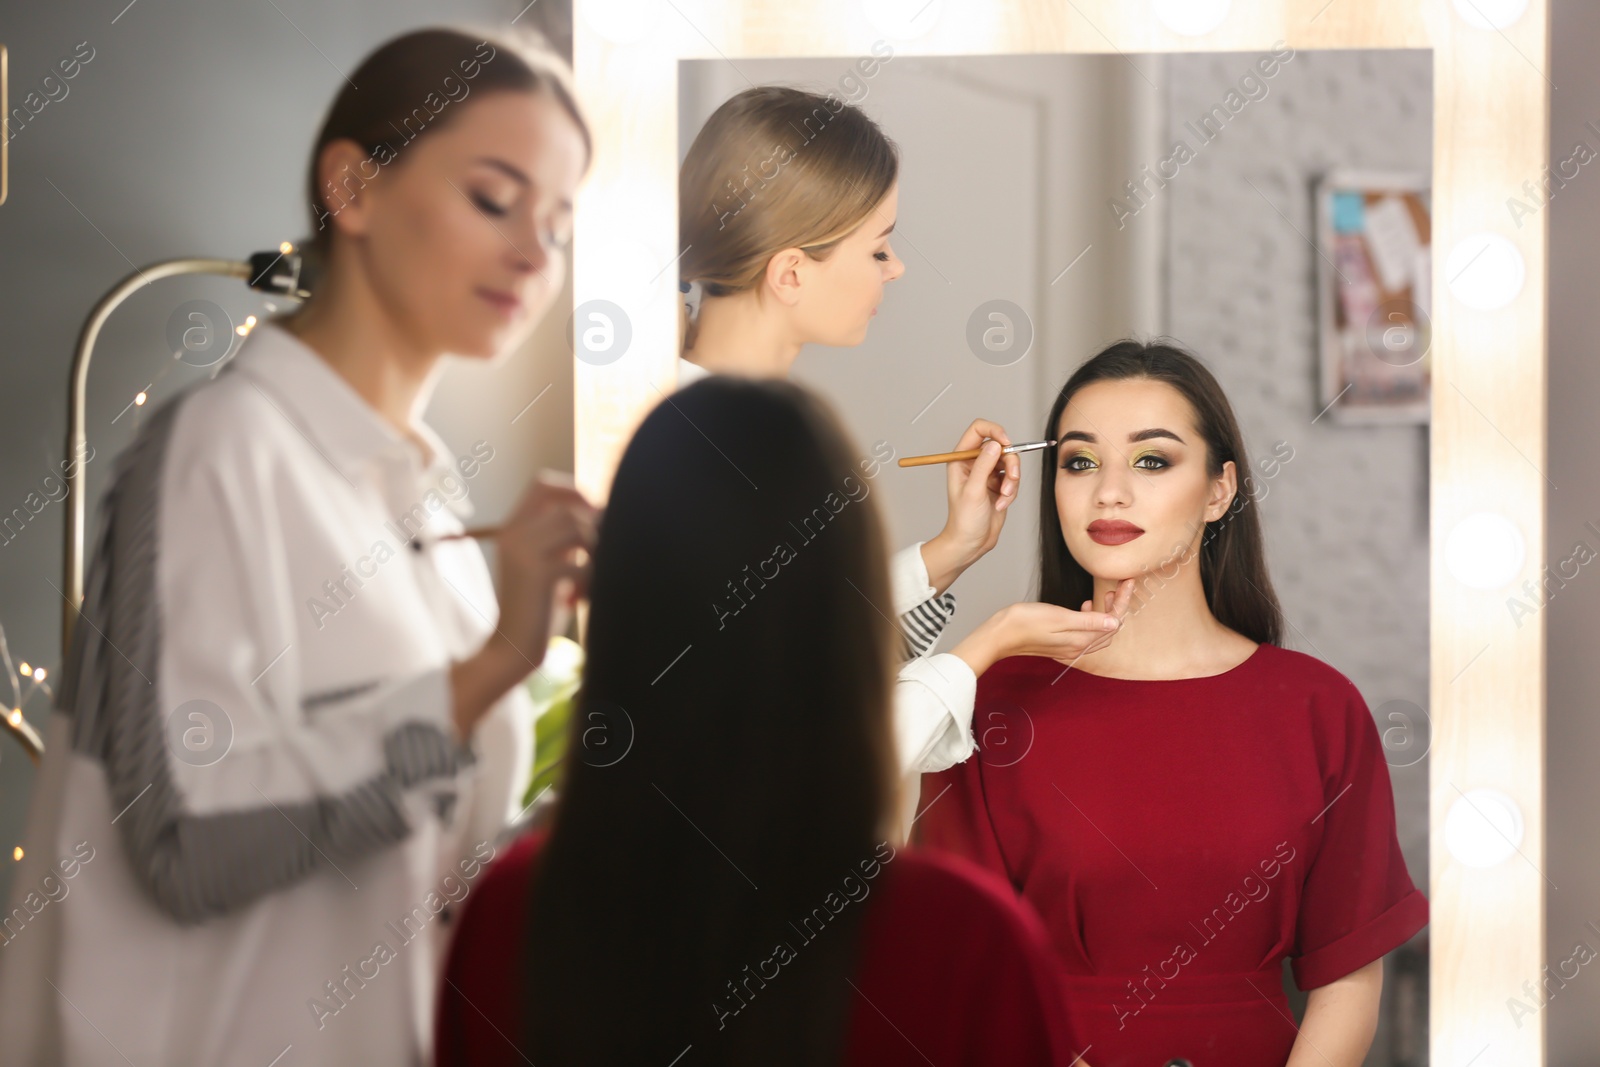 Photo of Professional visage artist applying makeup on woman's face in salon